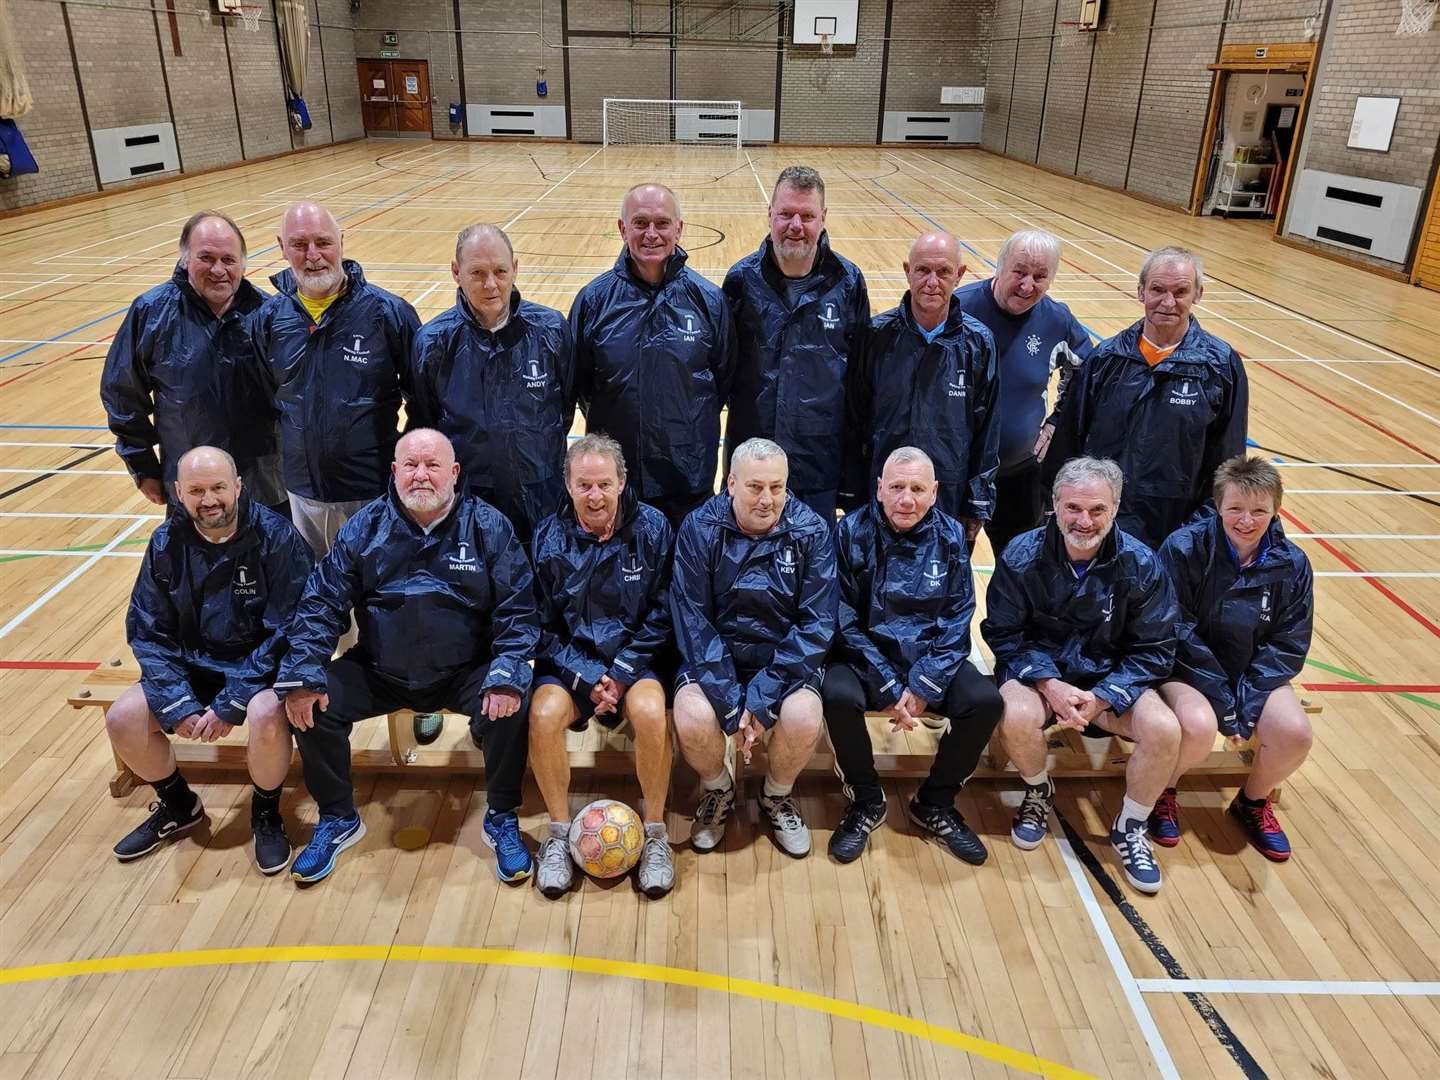 Forres’ walking footballers in new coach jackets featuring a Nelson’s Tower team logo designed and supplied by H&M Designs, Elgin.